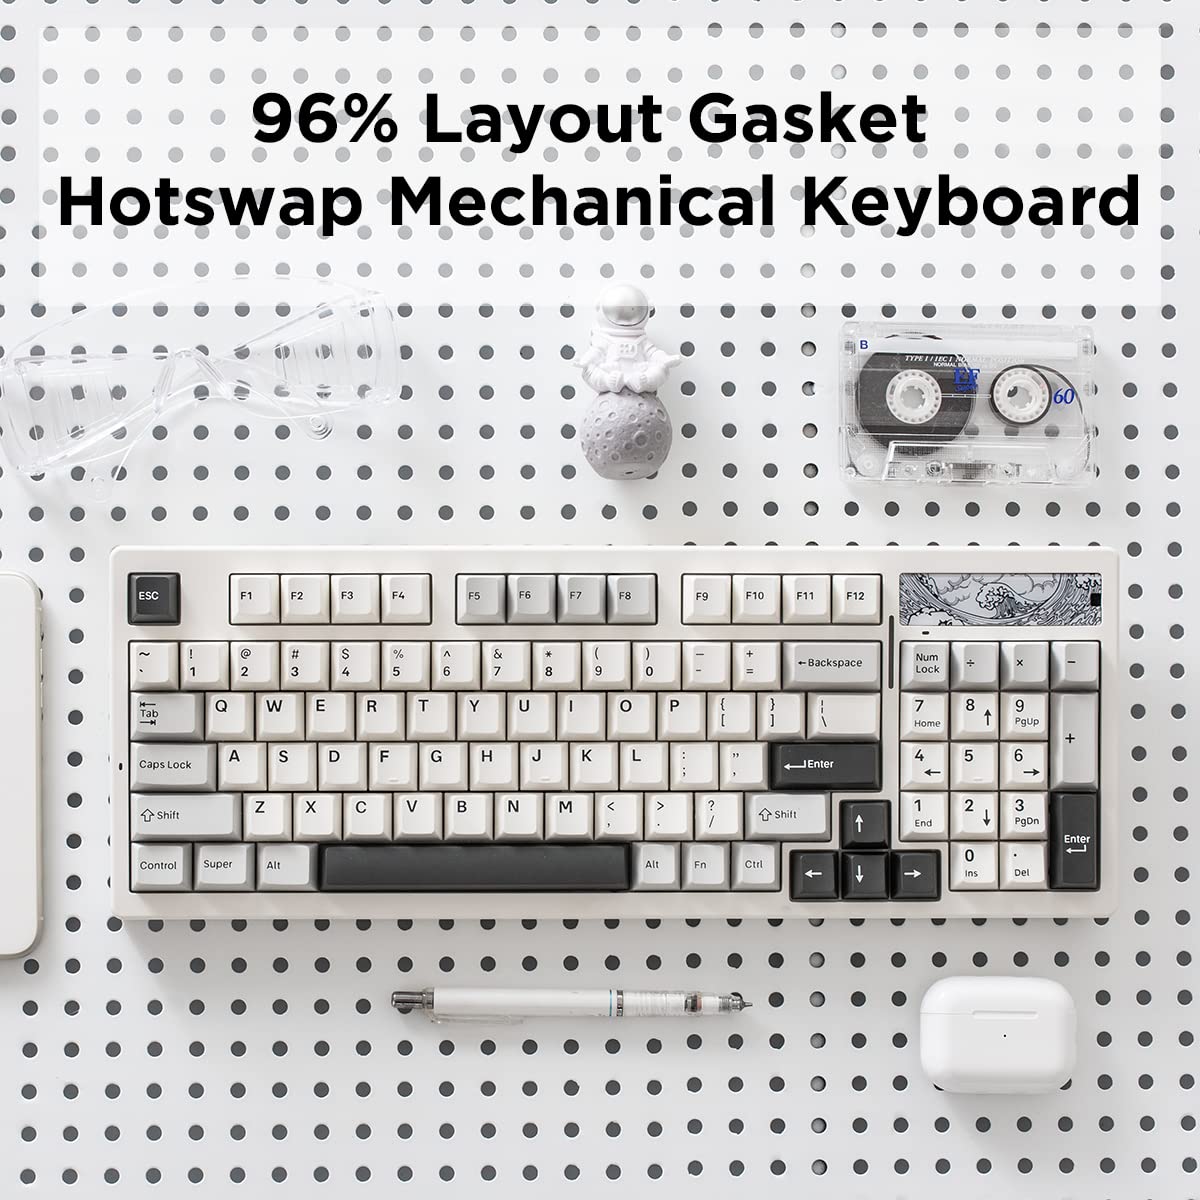 YUNZII Keynovo IF98 98 Key 96% 1800 Hot Swappable Gasket Mechanical Gaming Keyboard with Double Shot PBT Keycaps, RGB Backlight for Mac & Win (Custom Linear Switch, White)